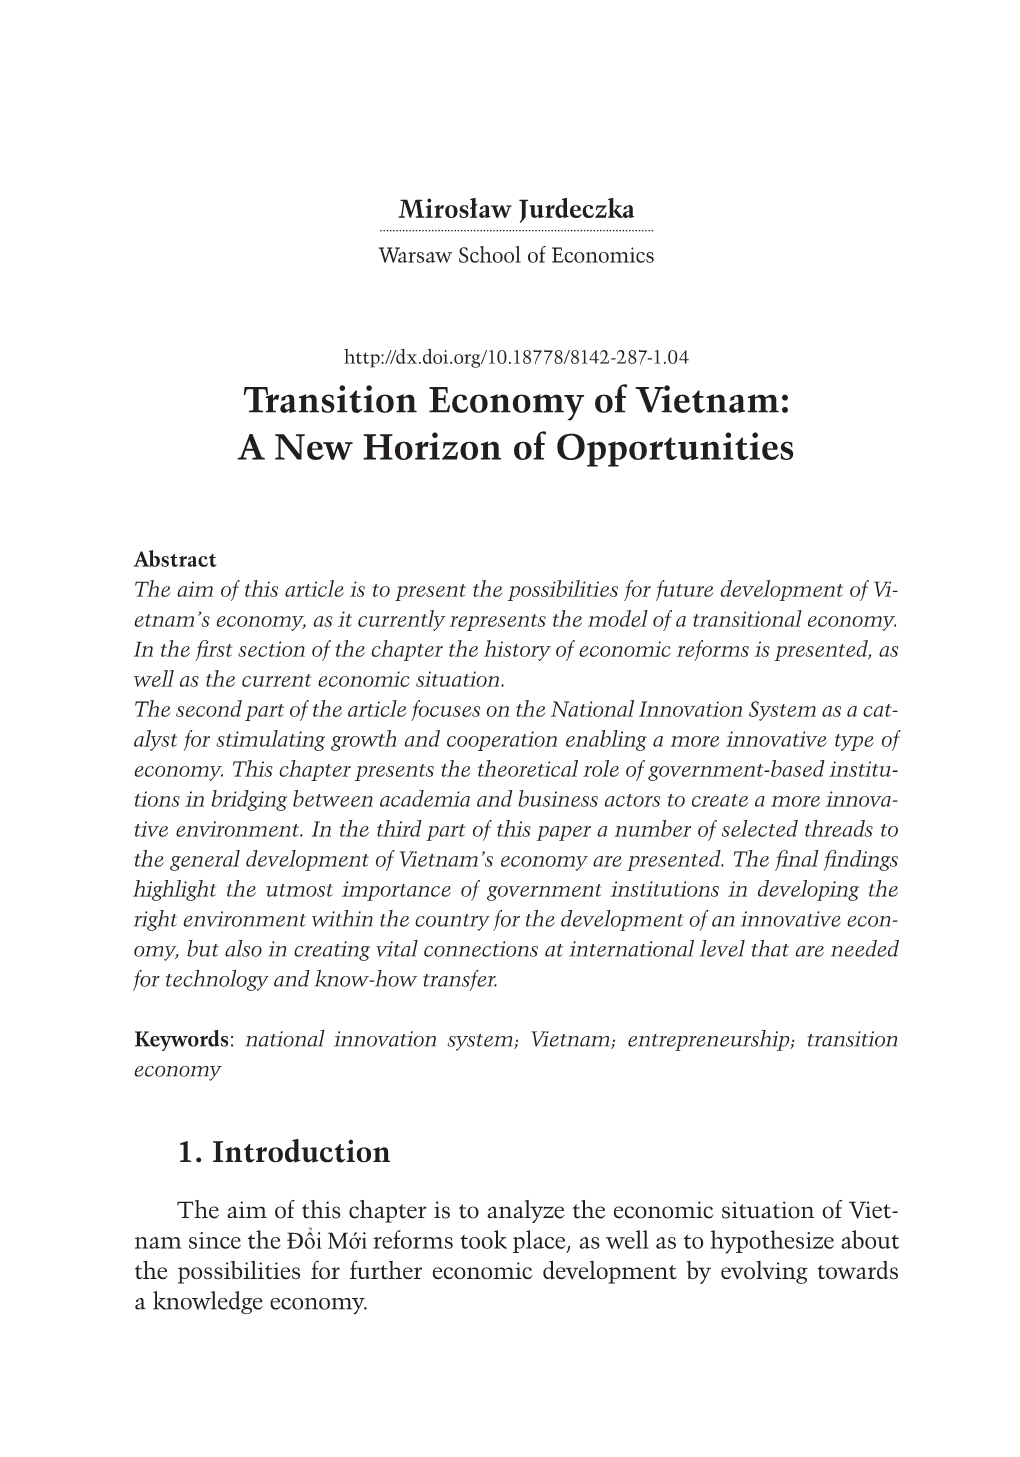 Transition Economy of Vietnam: a New Horizon of Opportunities